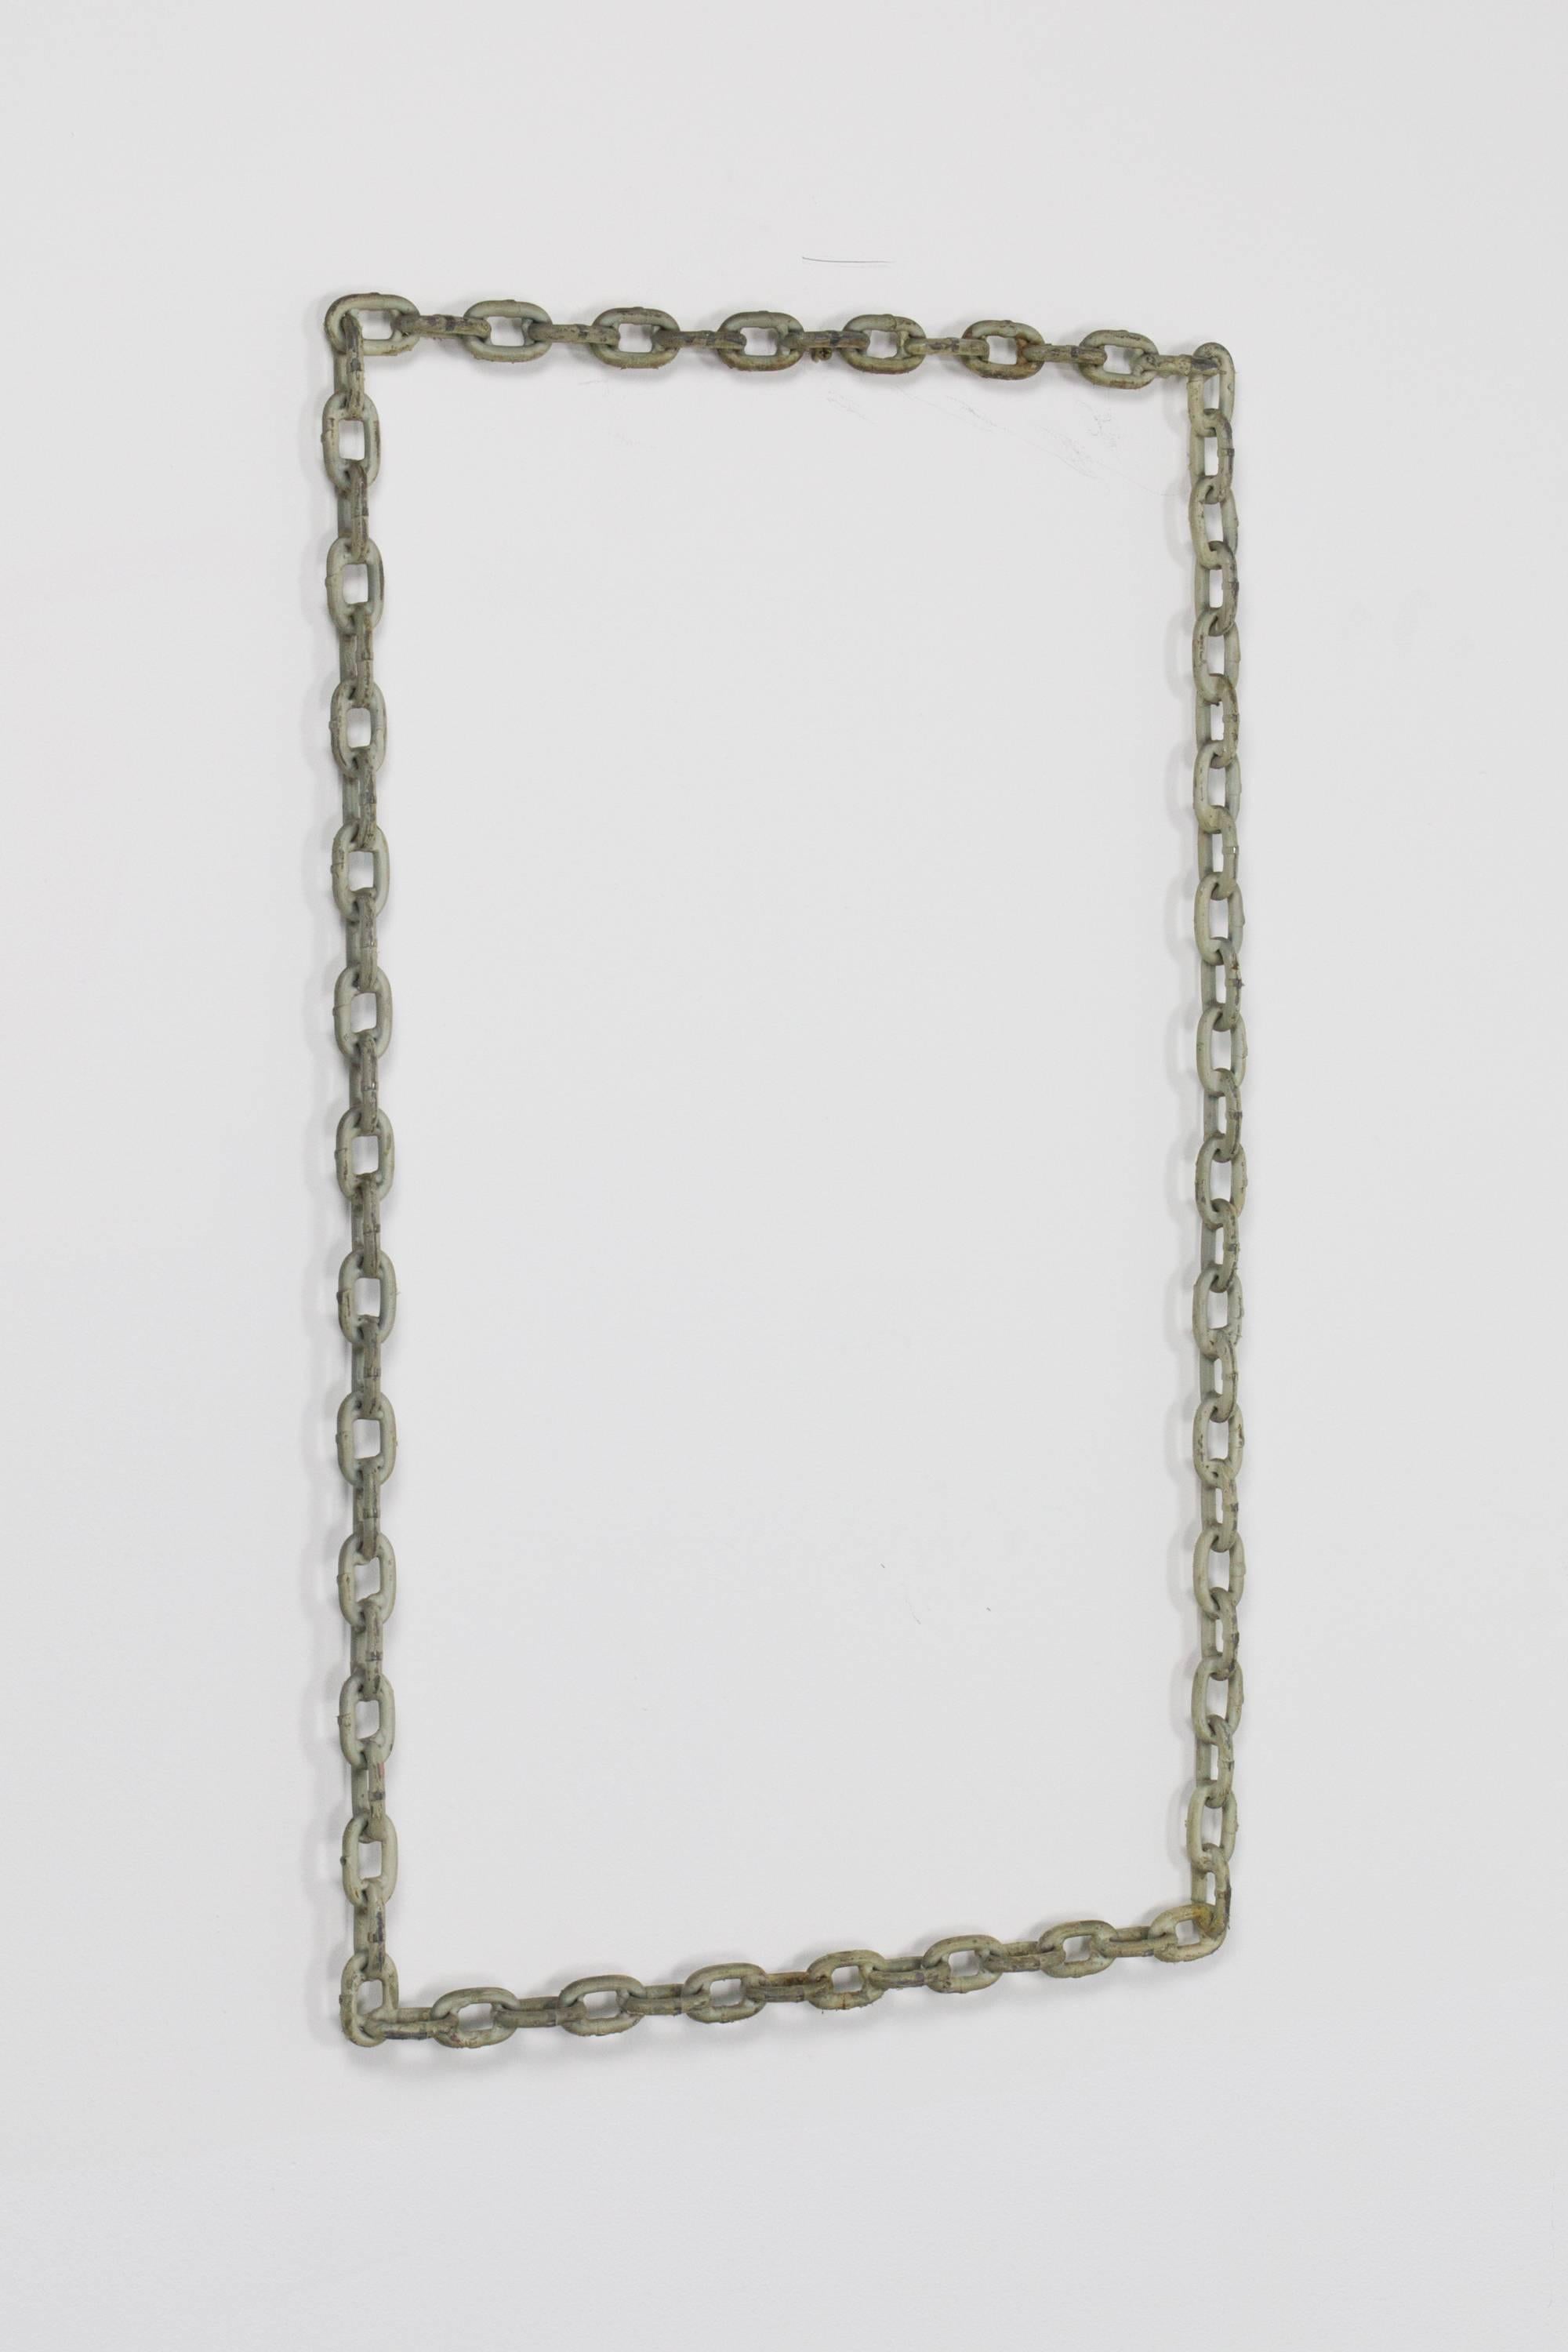 Welded handmade chain wall hanging with distressed white paint for use as decoration or as a frame.